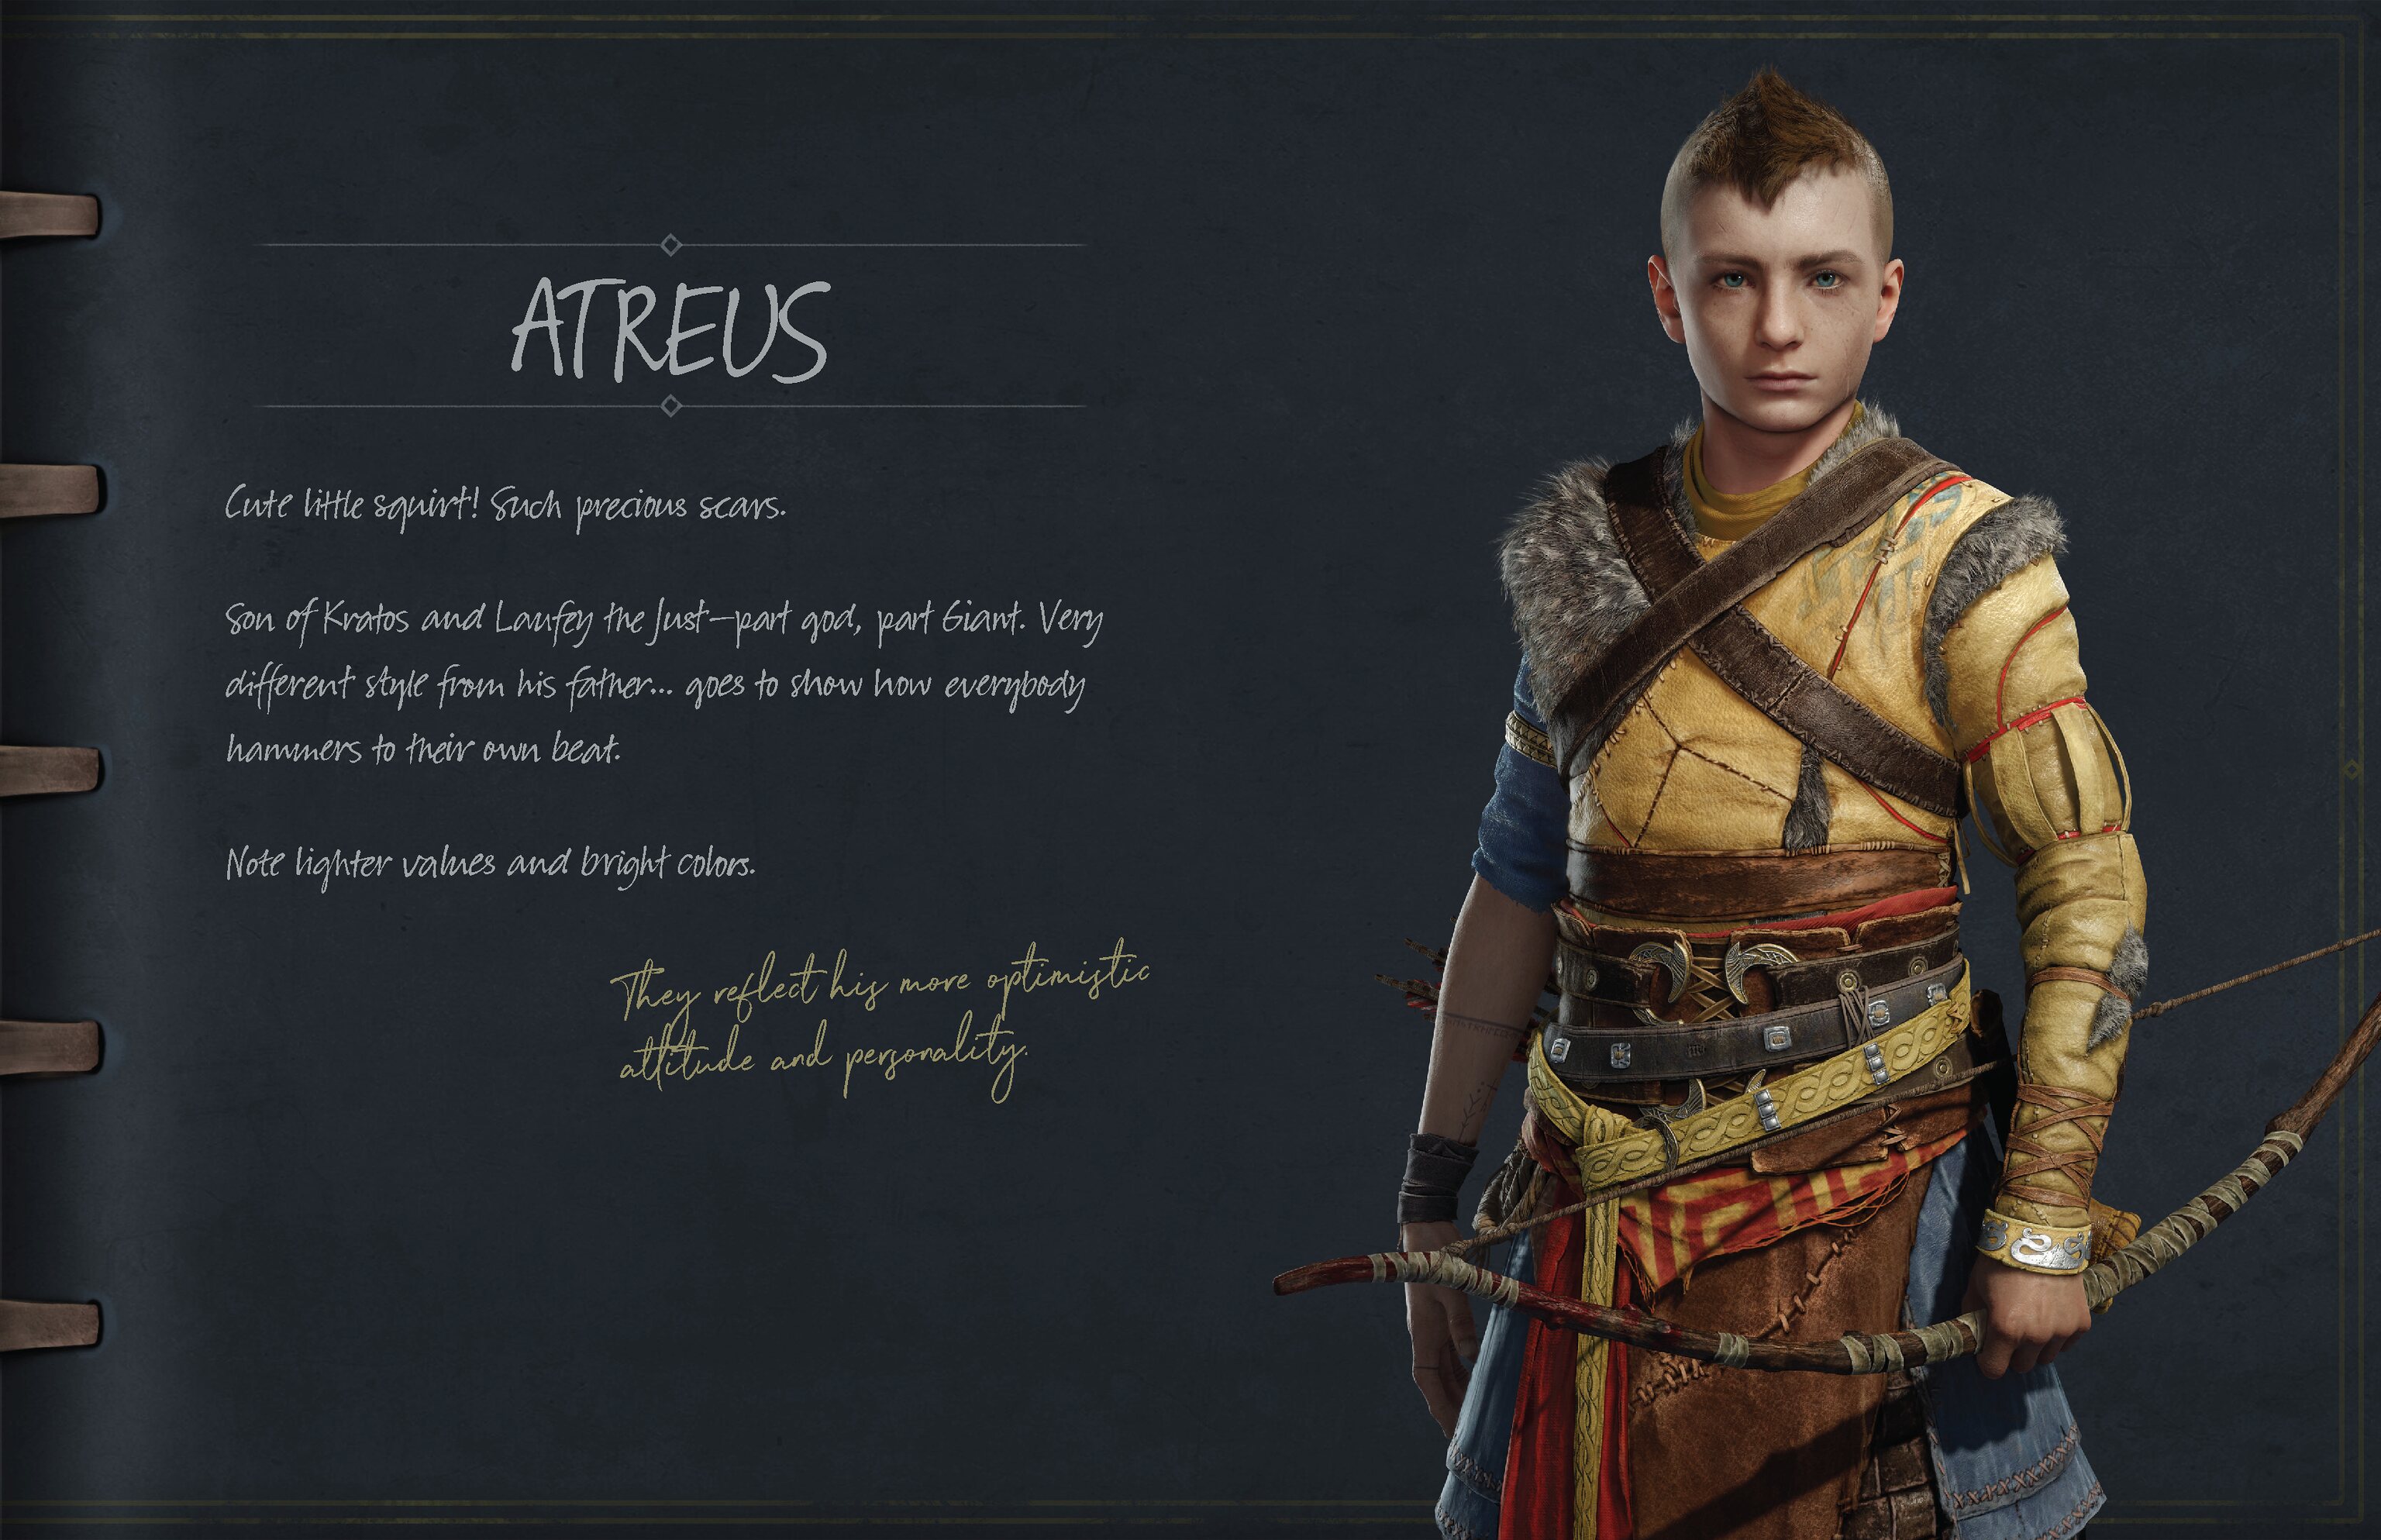 This page houses an introduction of Atreus written by Lúnda with a note from Sindri. Atreus stands with the Talon Bow held in his left hand.